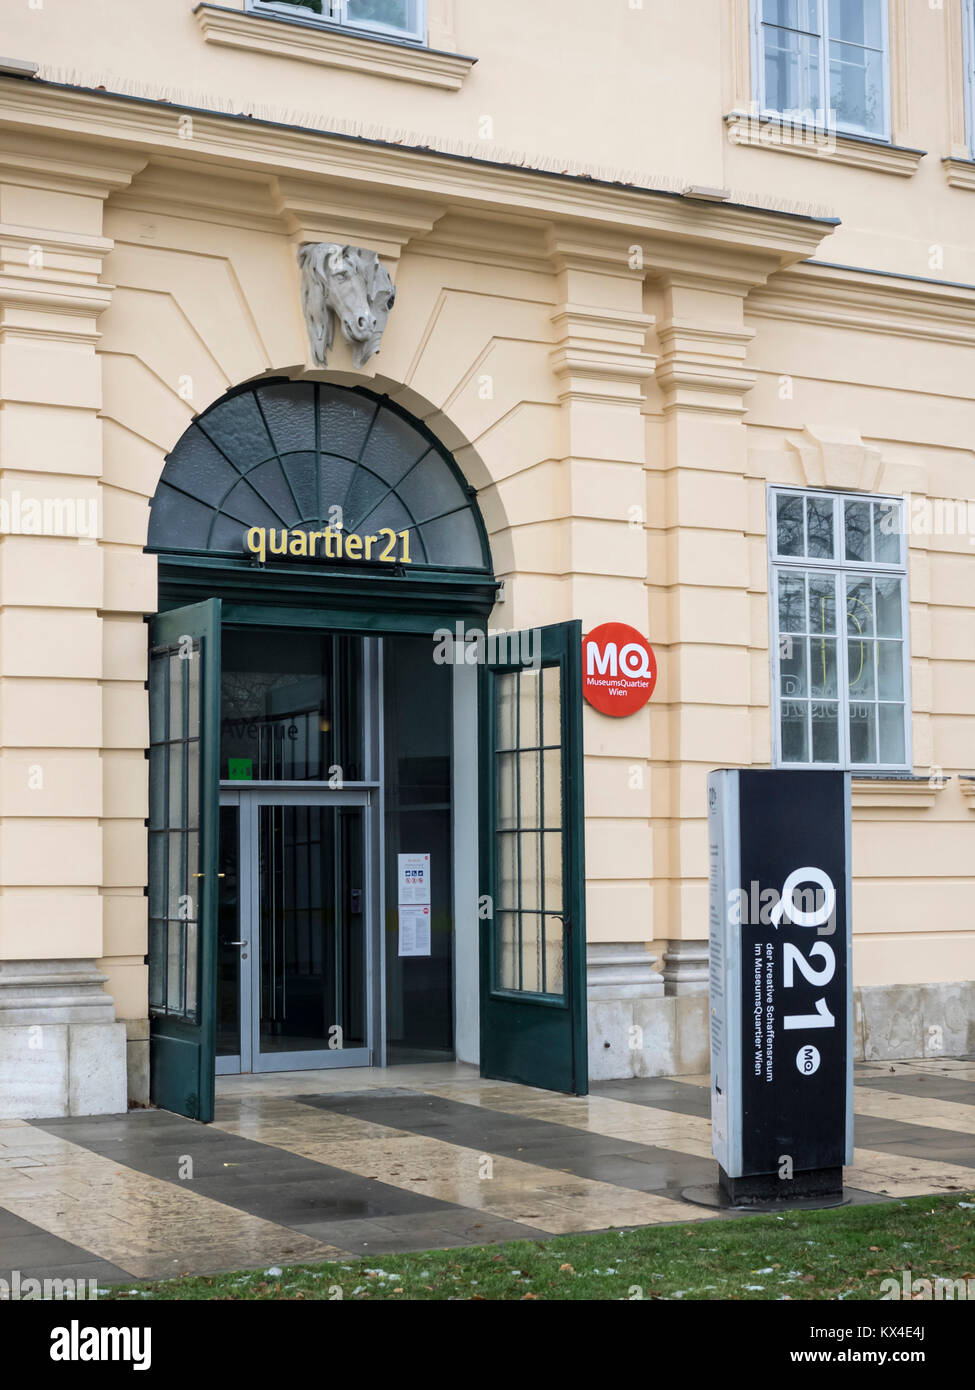 VIENNA, AUSTRIA - DECEMBER 04, 2017:  Exterior view of entrance to Q21 in the MuseumsQuartier Arts Complex Stock Photo